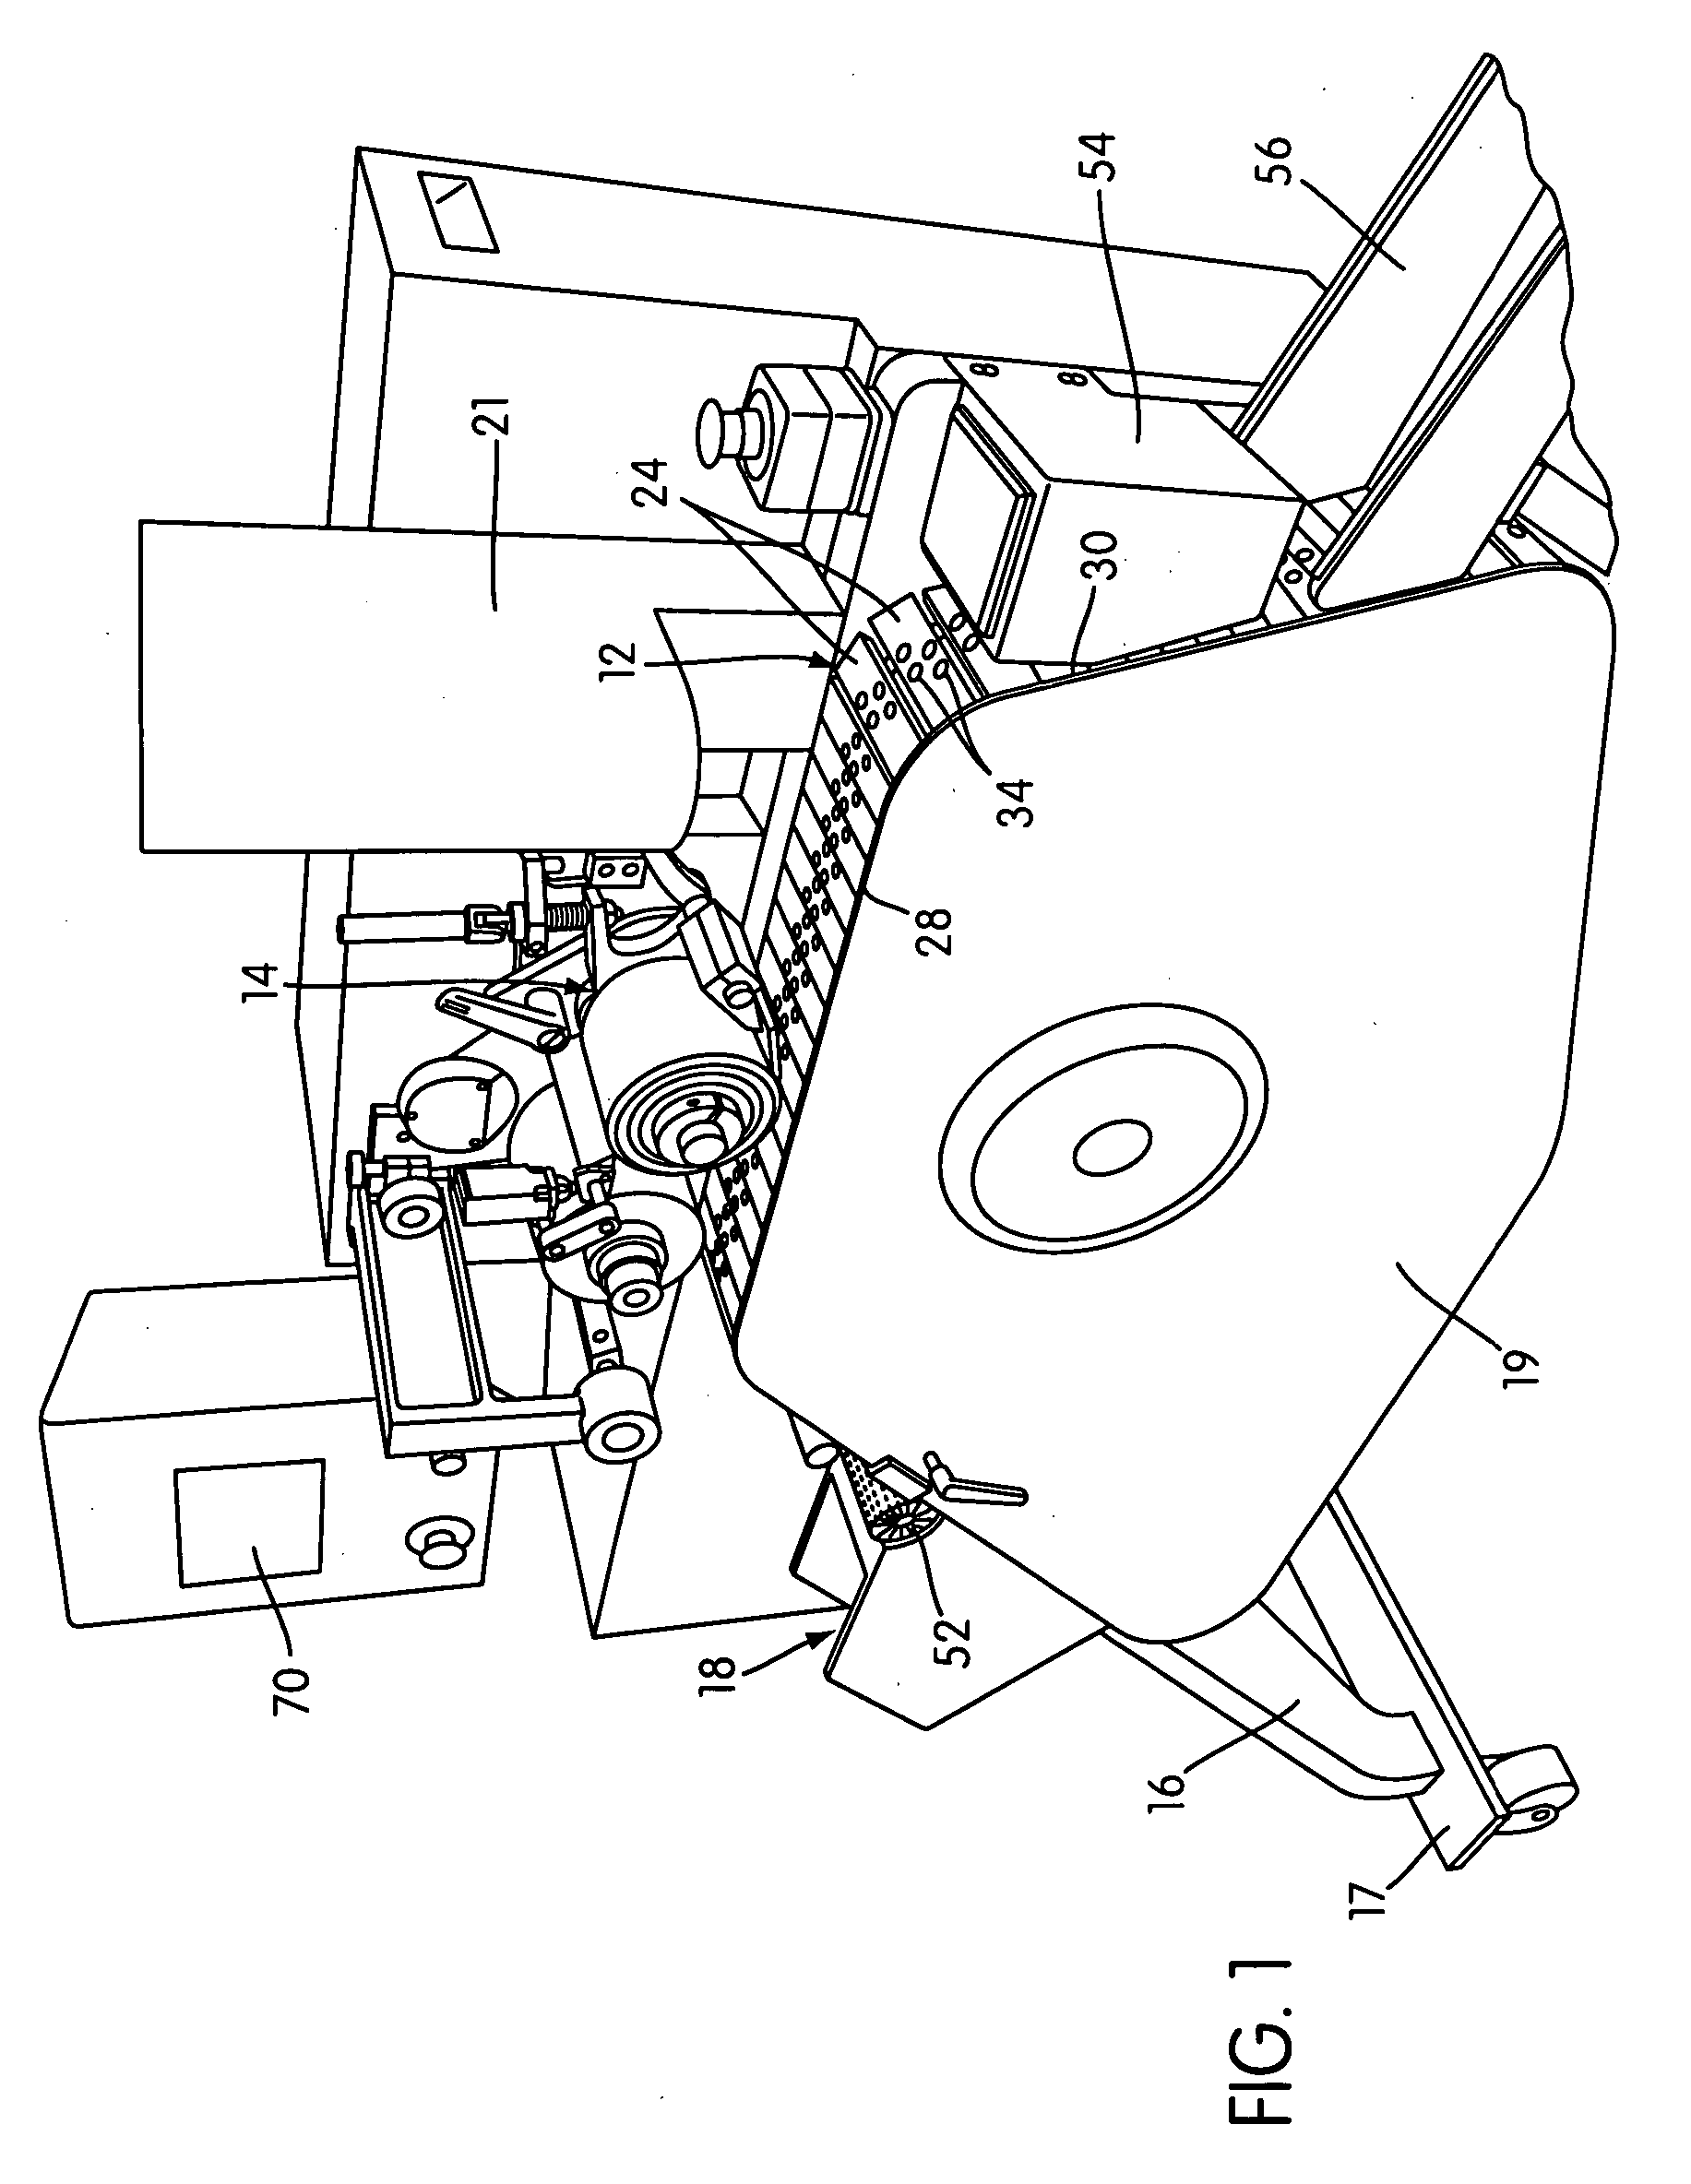 Laser unit, inspection unit, method for inspecting and accepting/removing specified pellet-shaped articles from a conveyer mechanism, and pharmaceutical article